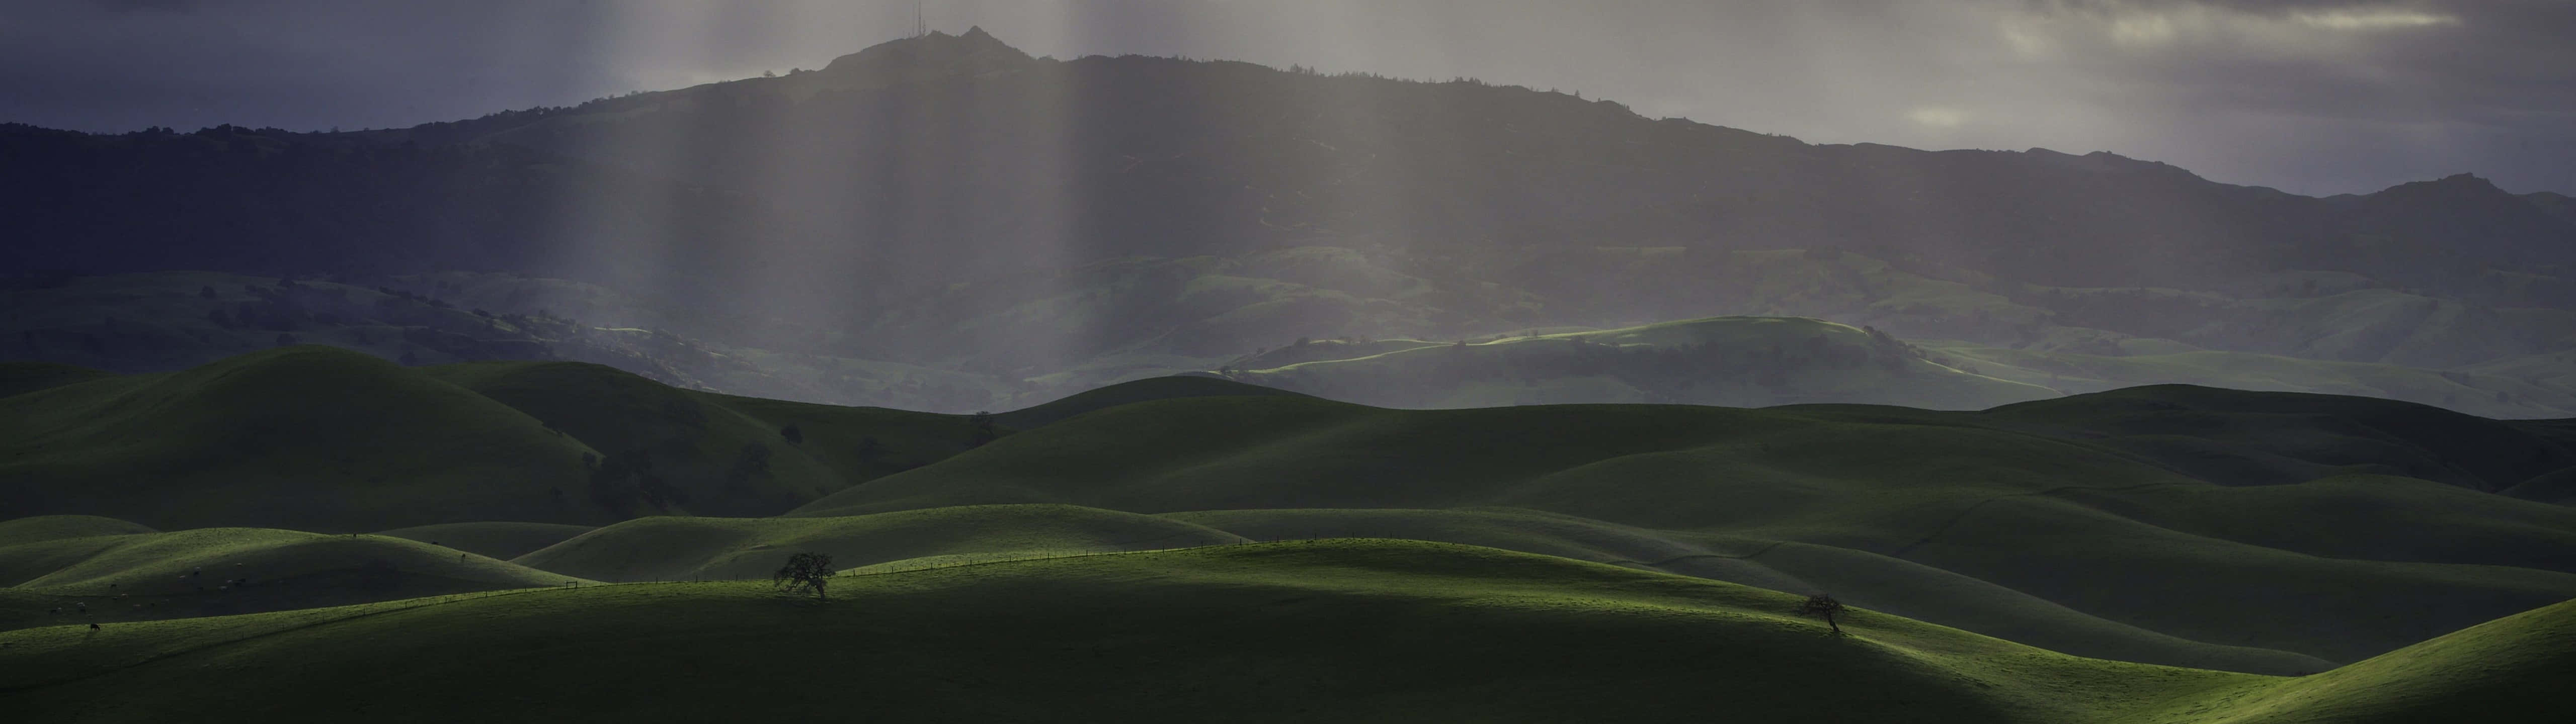 Soak in the beauty of California's Mountains Wallpaper